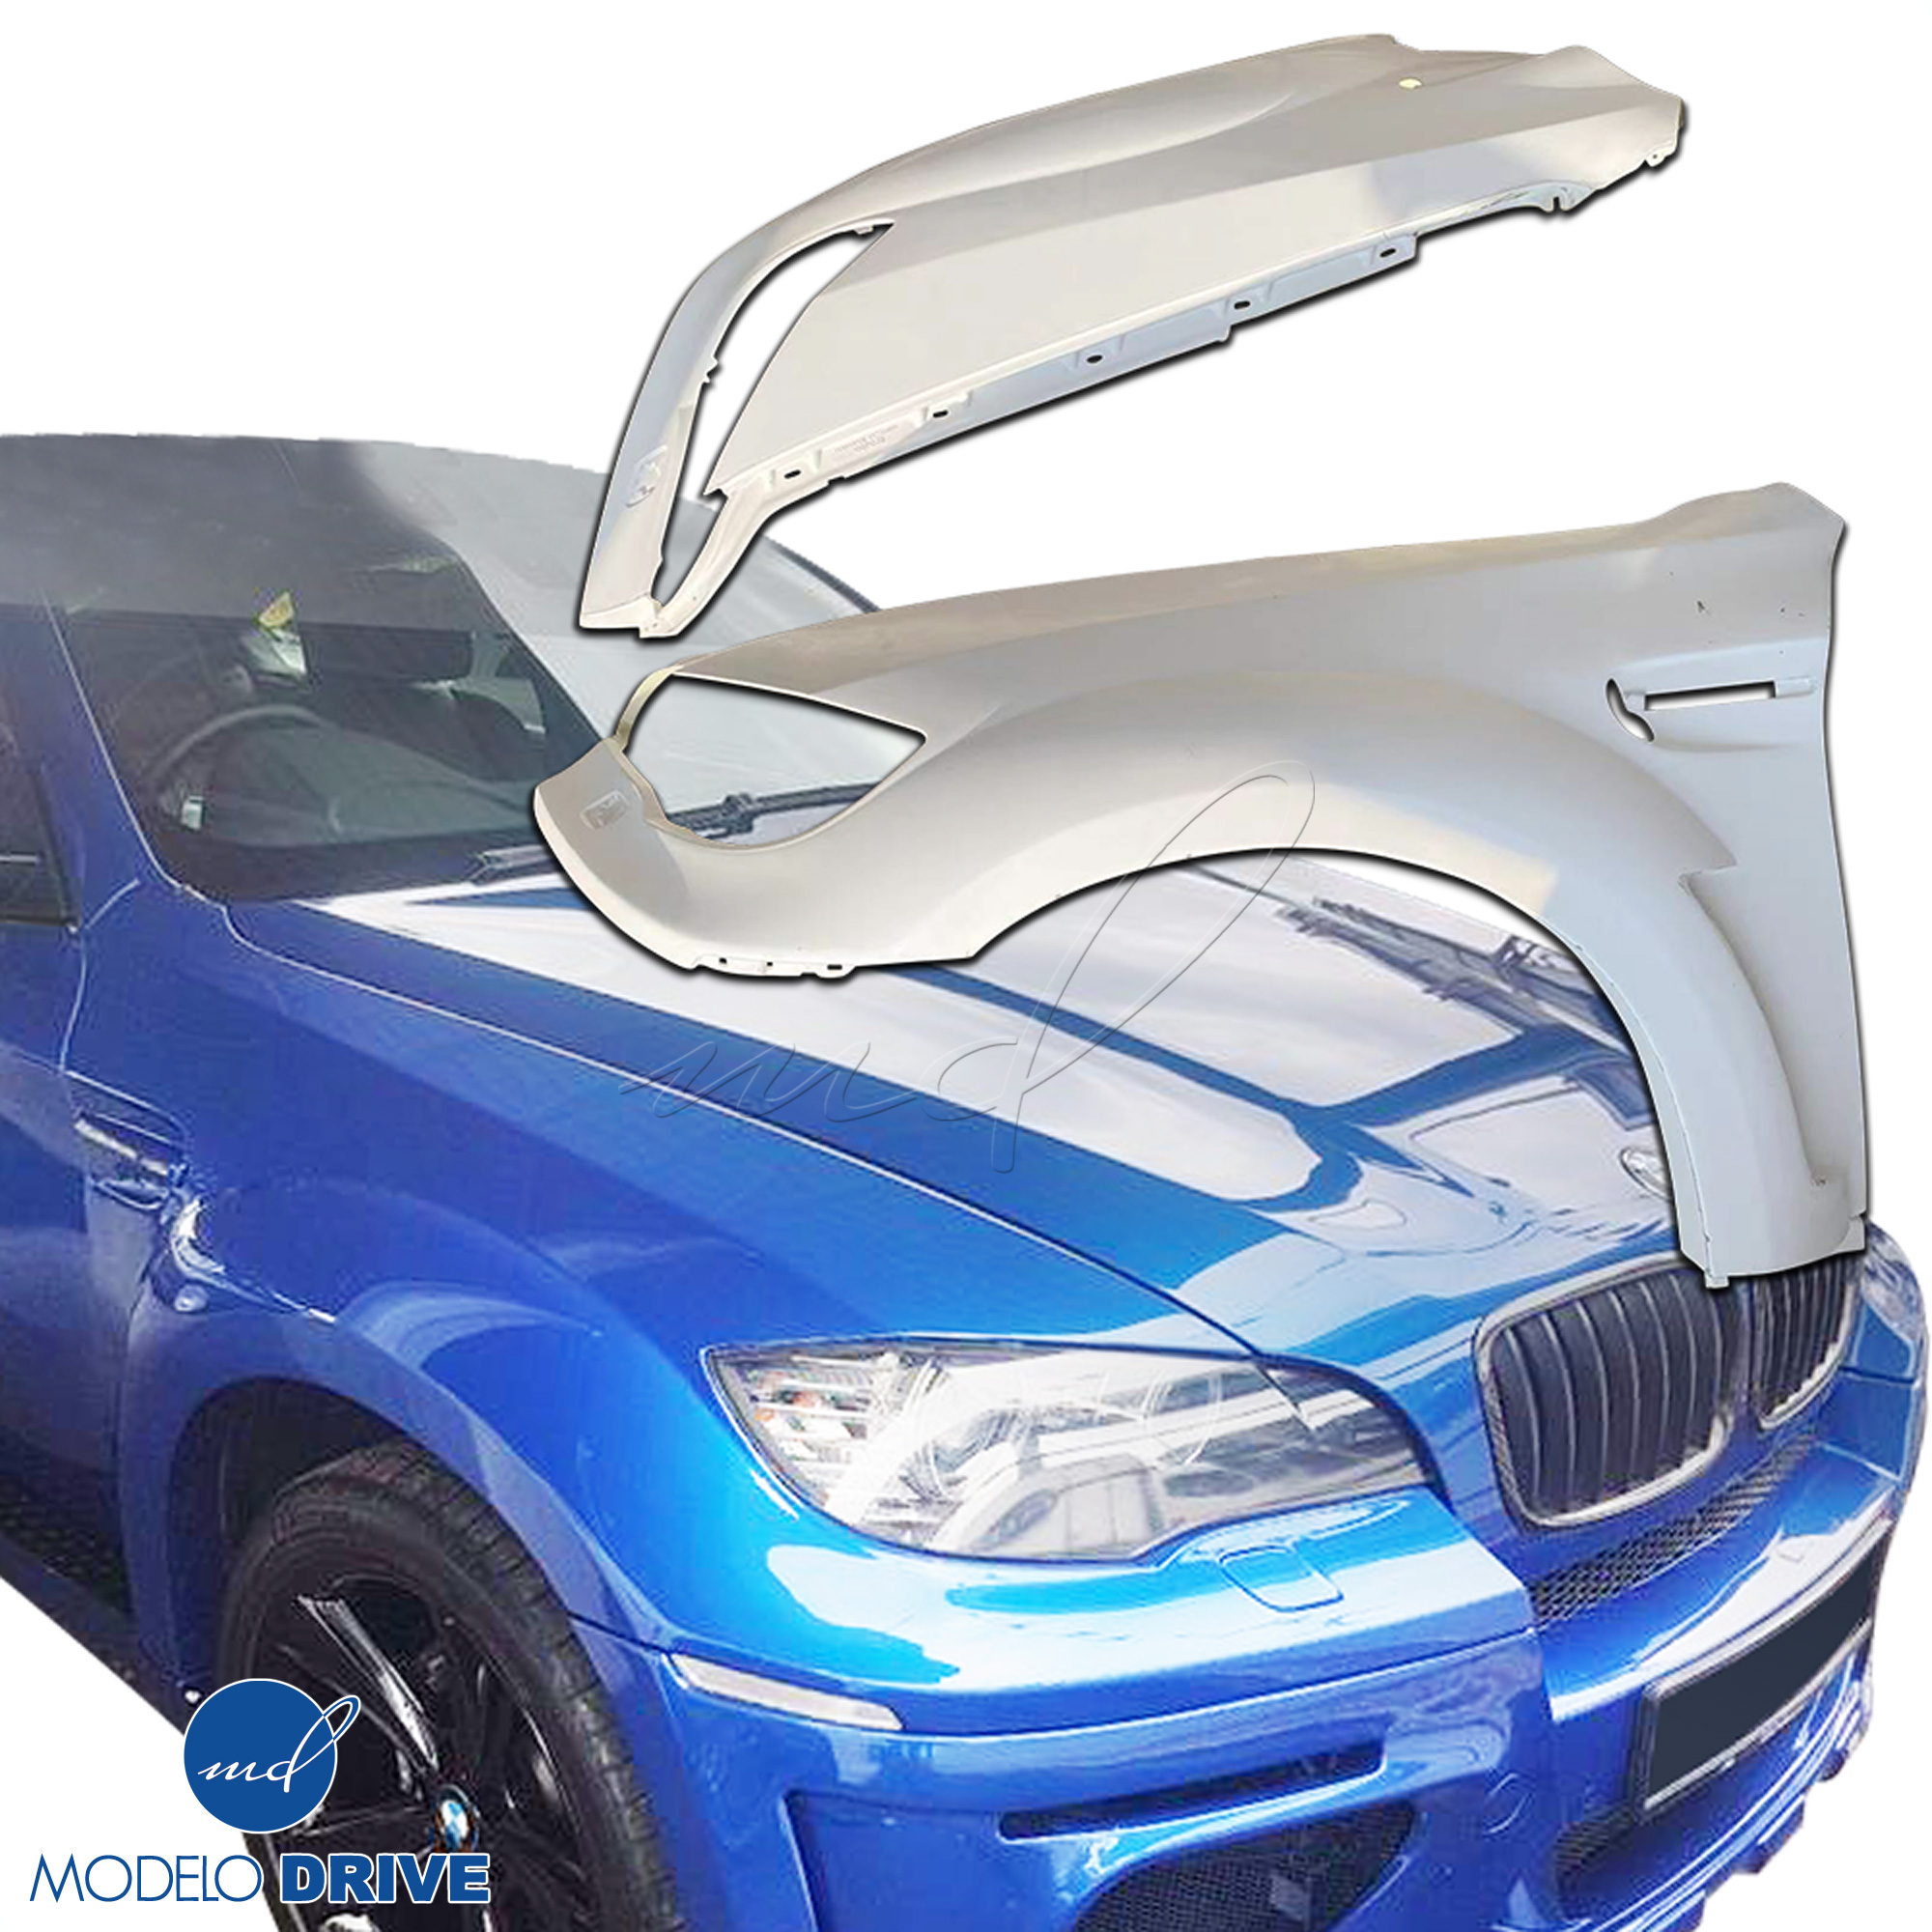 ModeloDrive FRP HAMA Wide Body Fenders (front) 2pc > BMW X6 E71 2008-2014 - Image 20